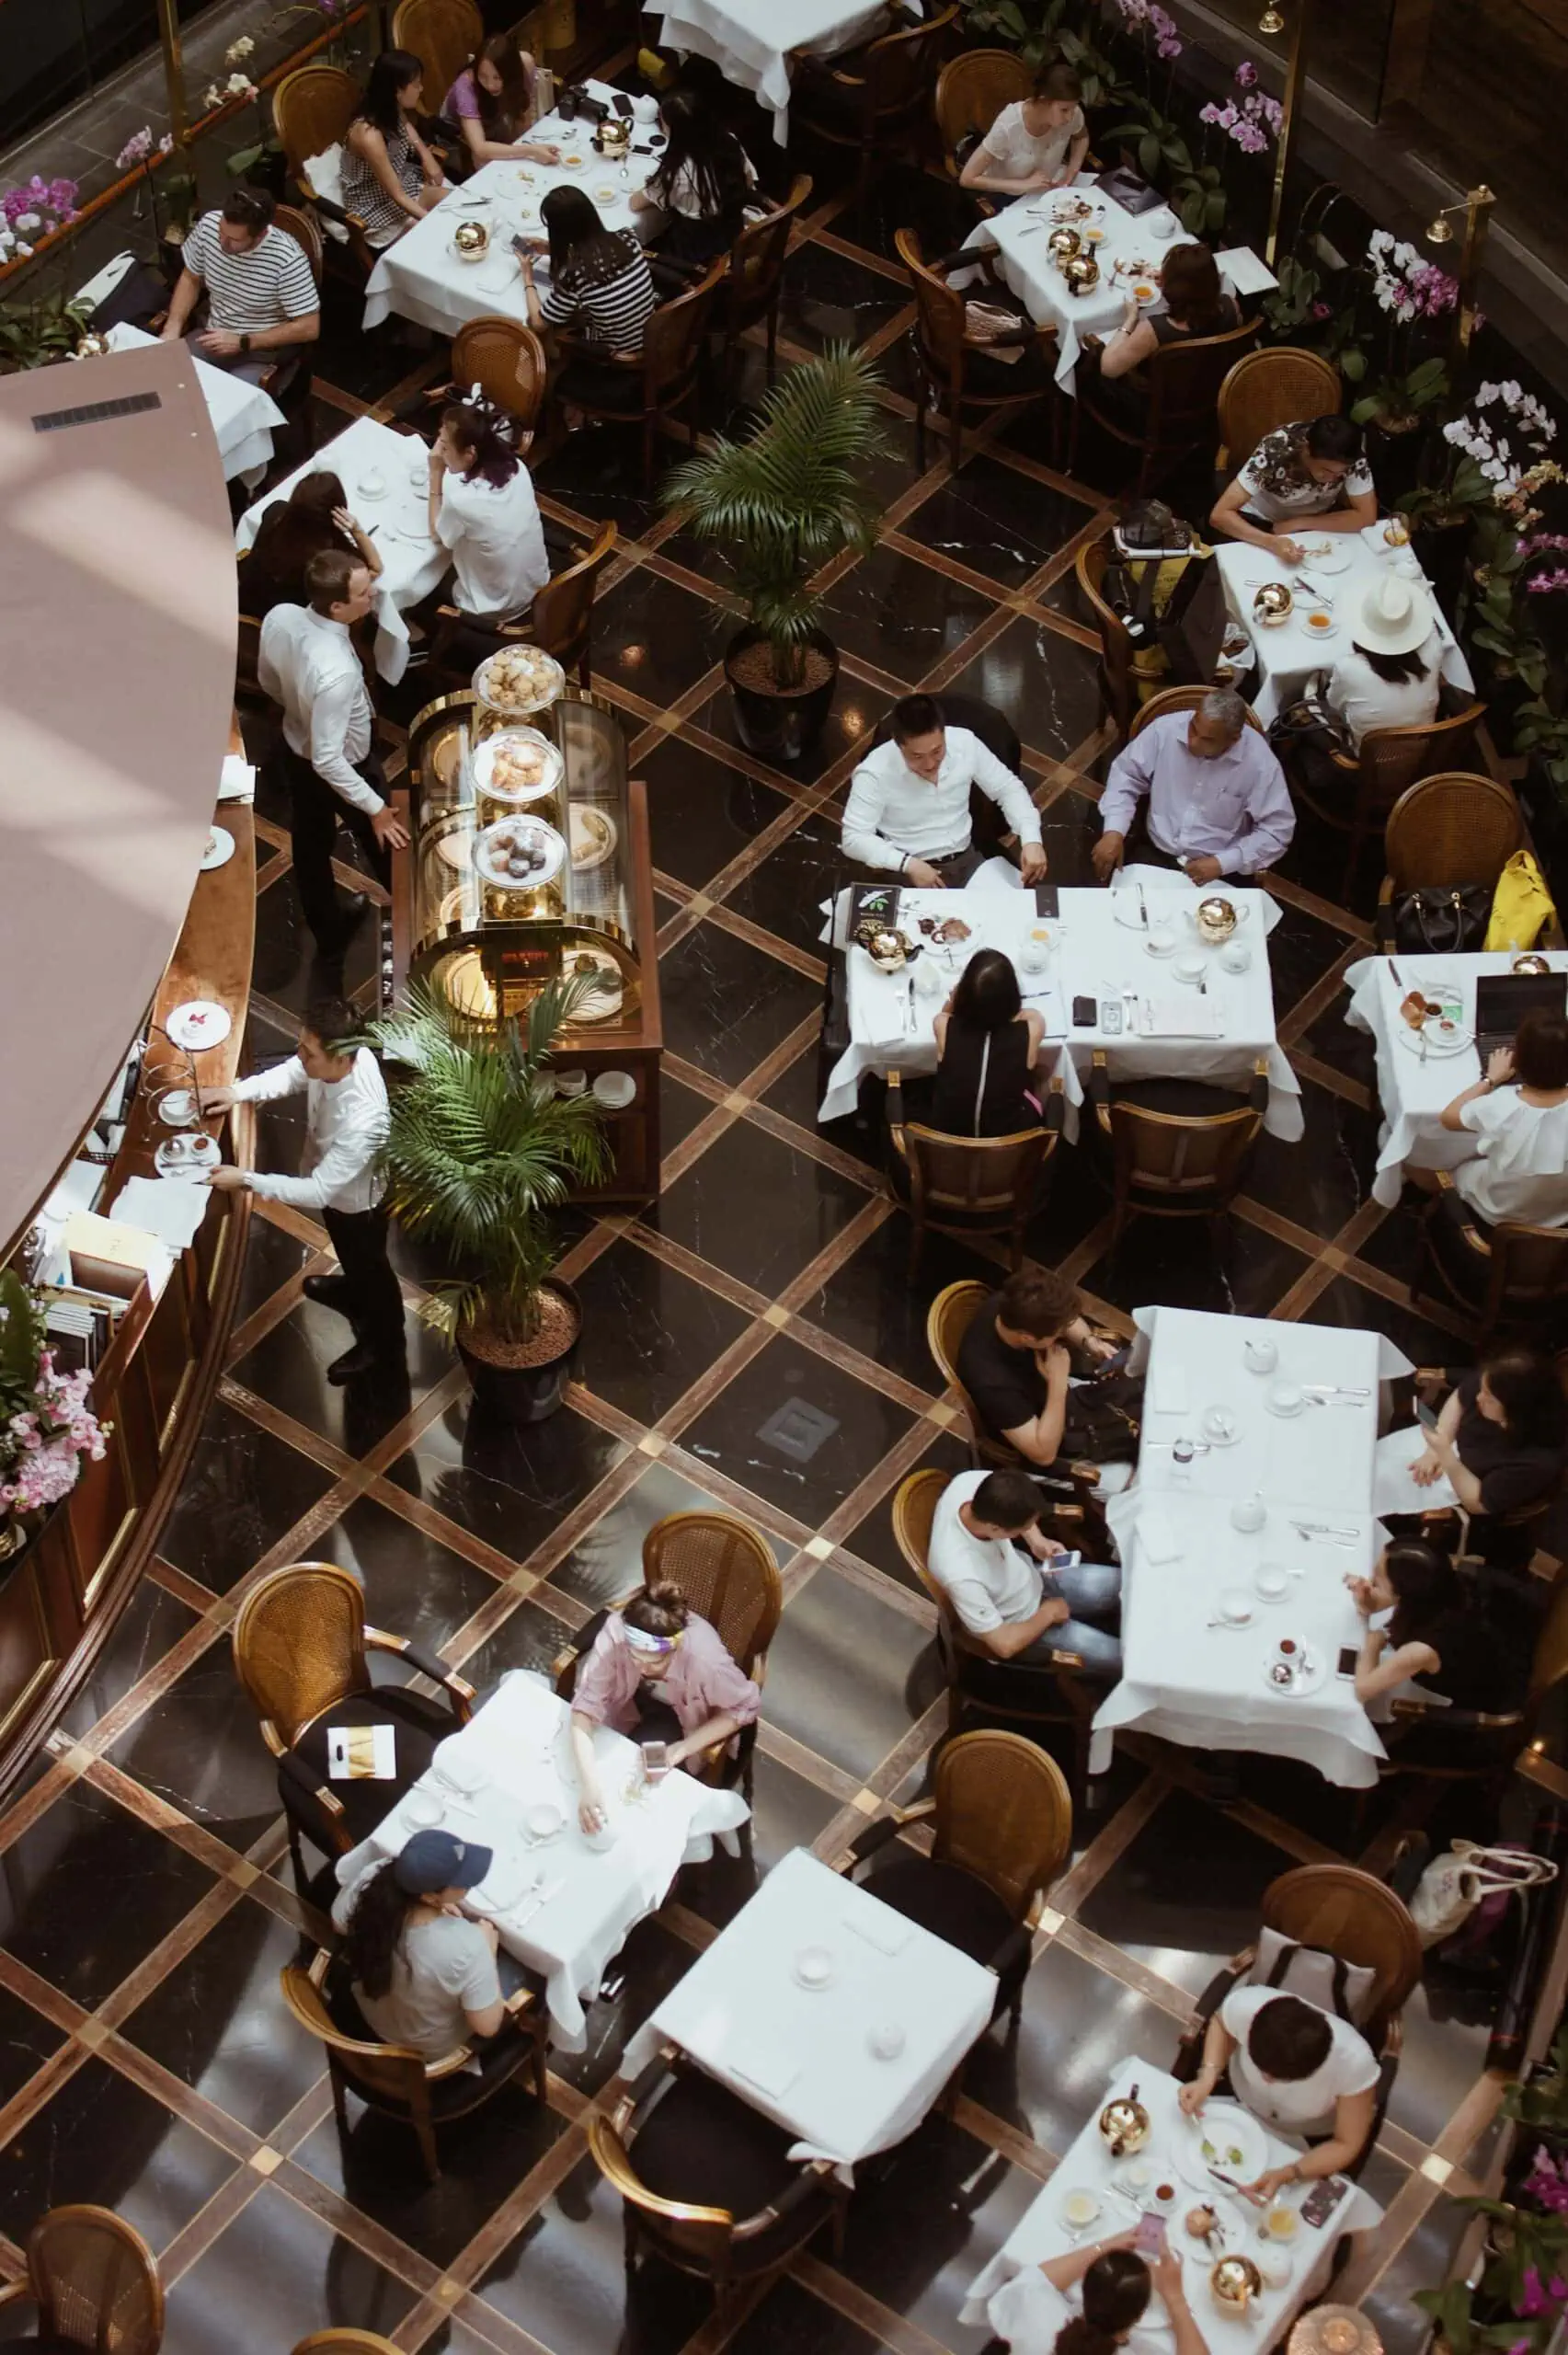 Secure dining area with restaurant security cameras